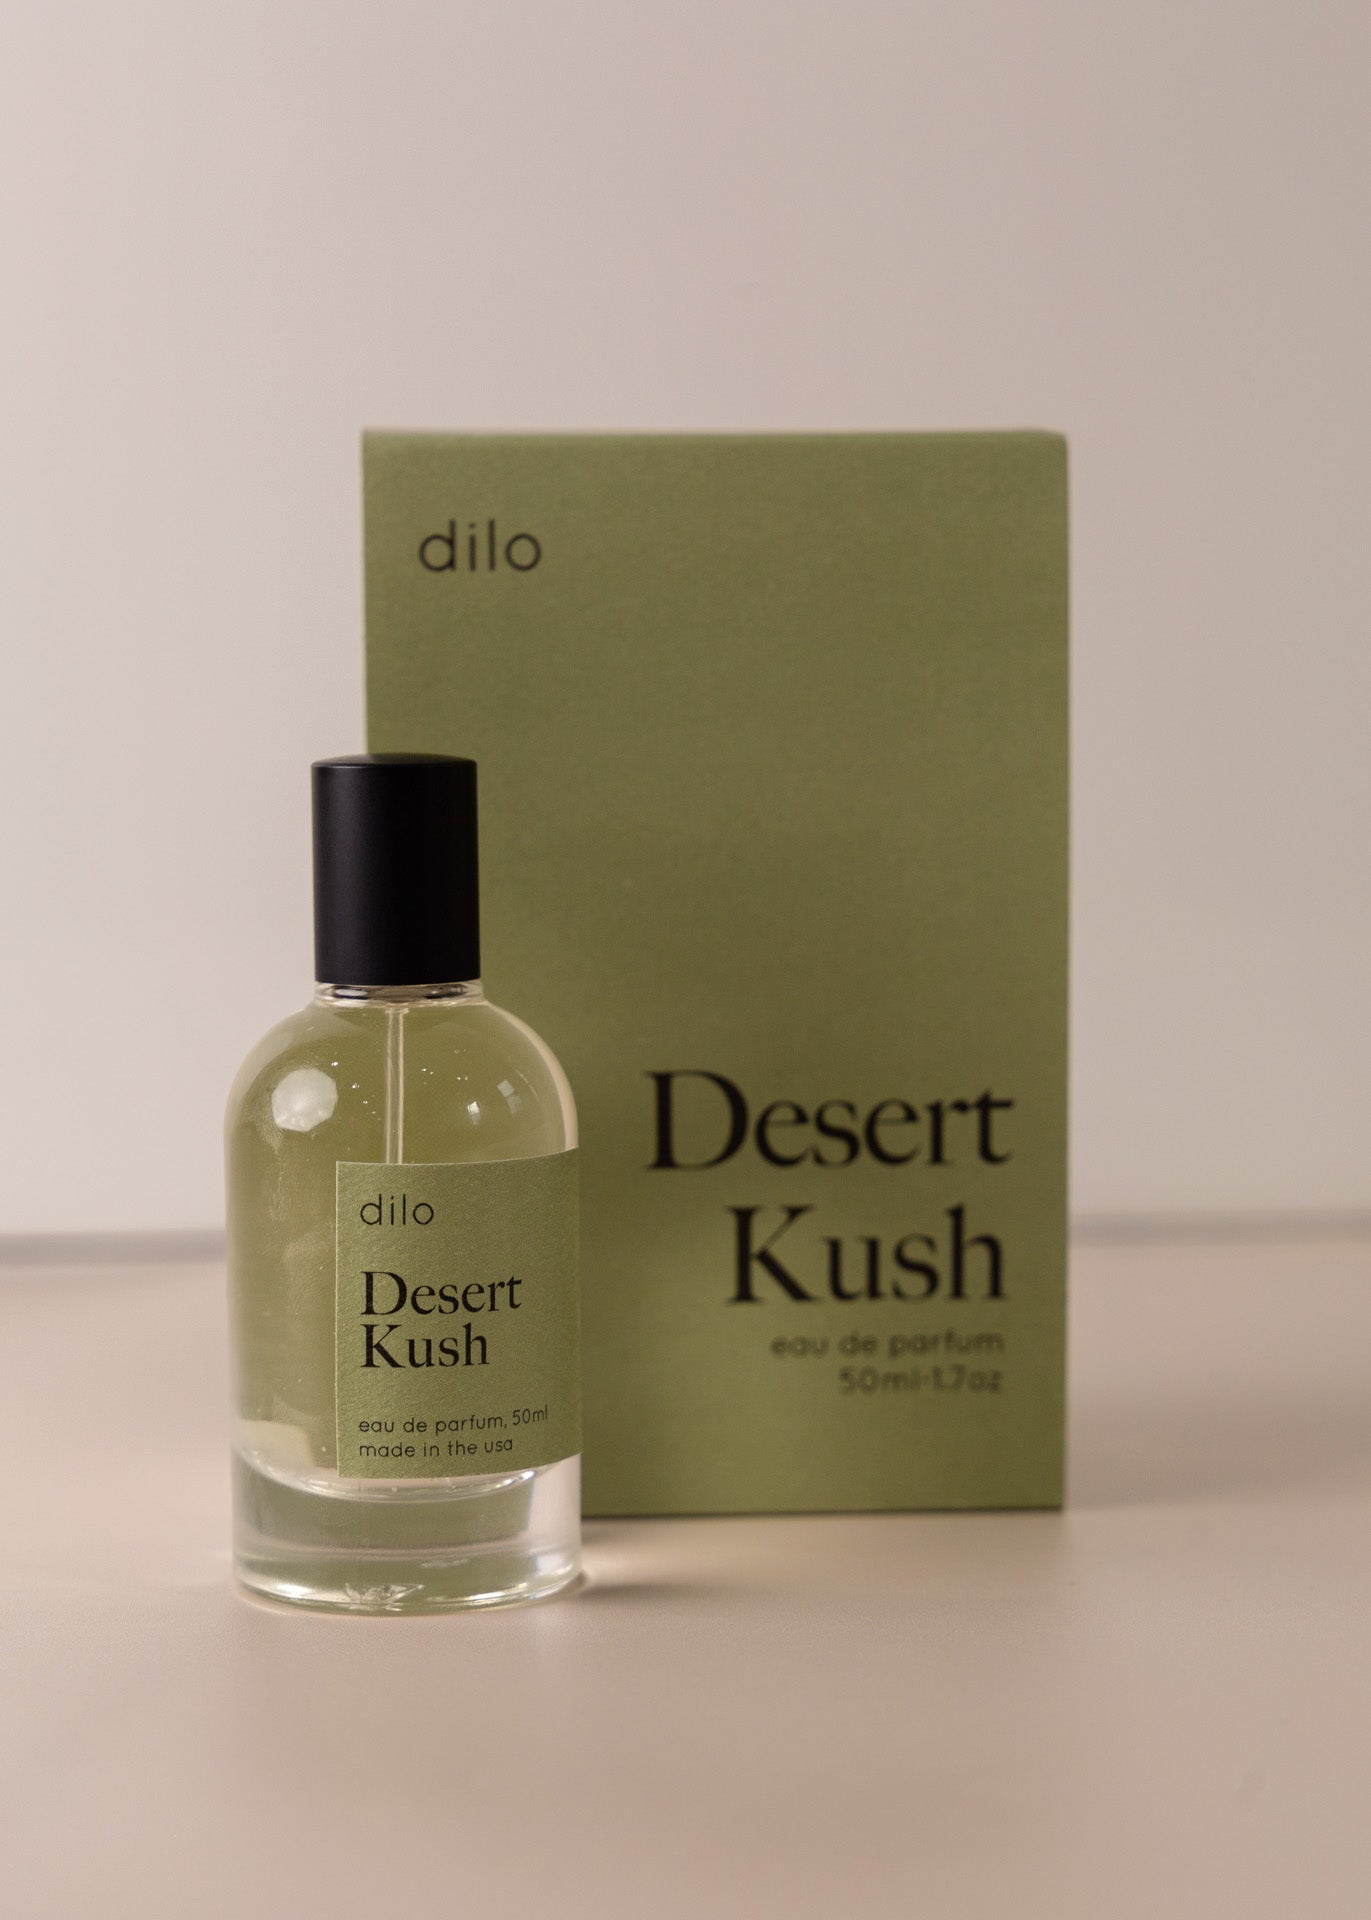 Bottle of perfume by dilo, with a green label on the front stating “desert kush. eau de parfum, 50 ml. made in the usa" with the green box that it comes in in the background